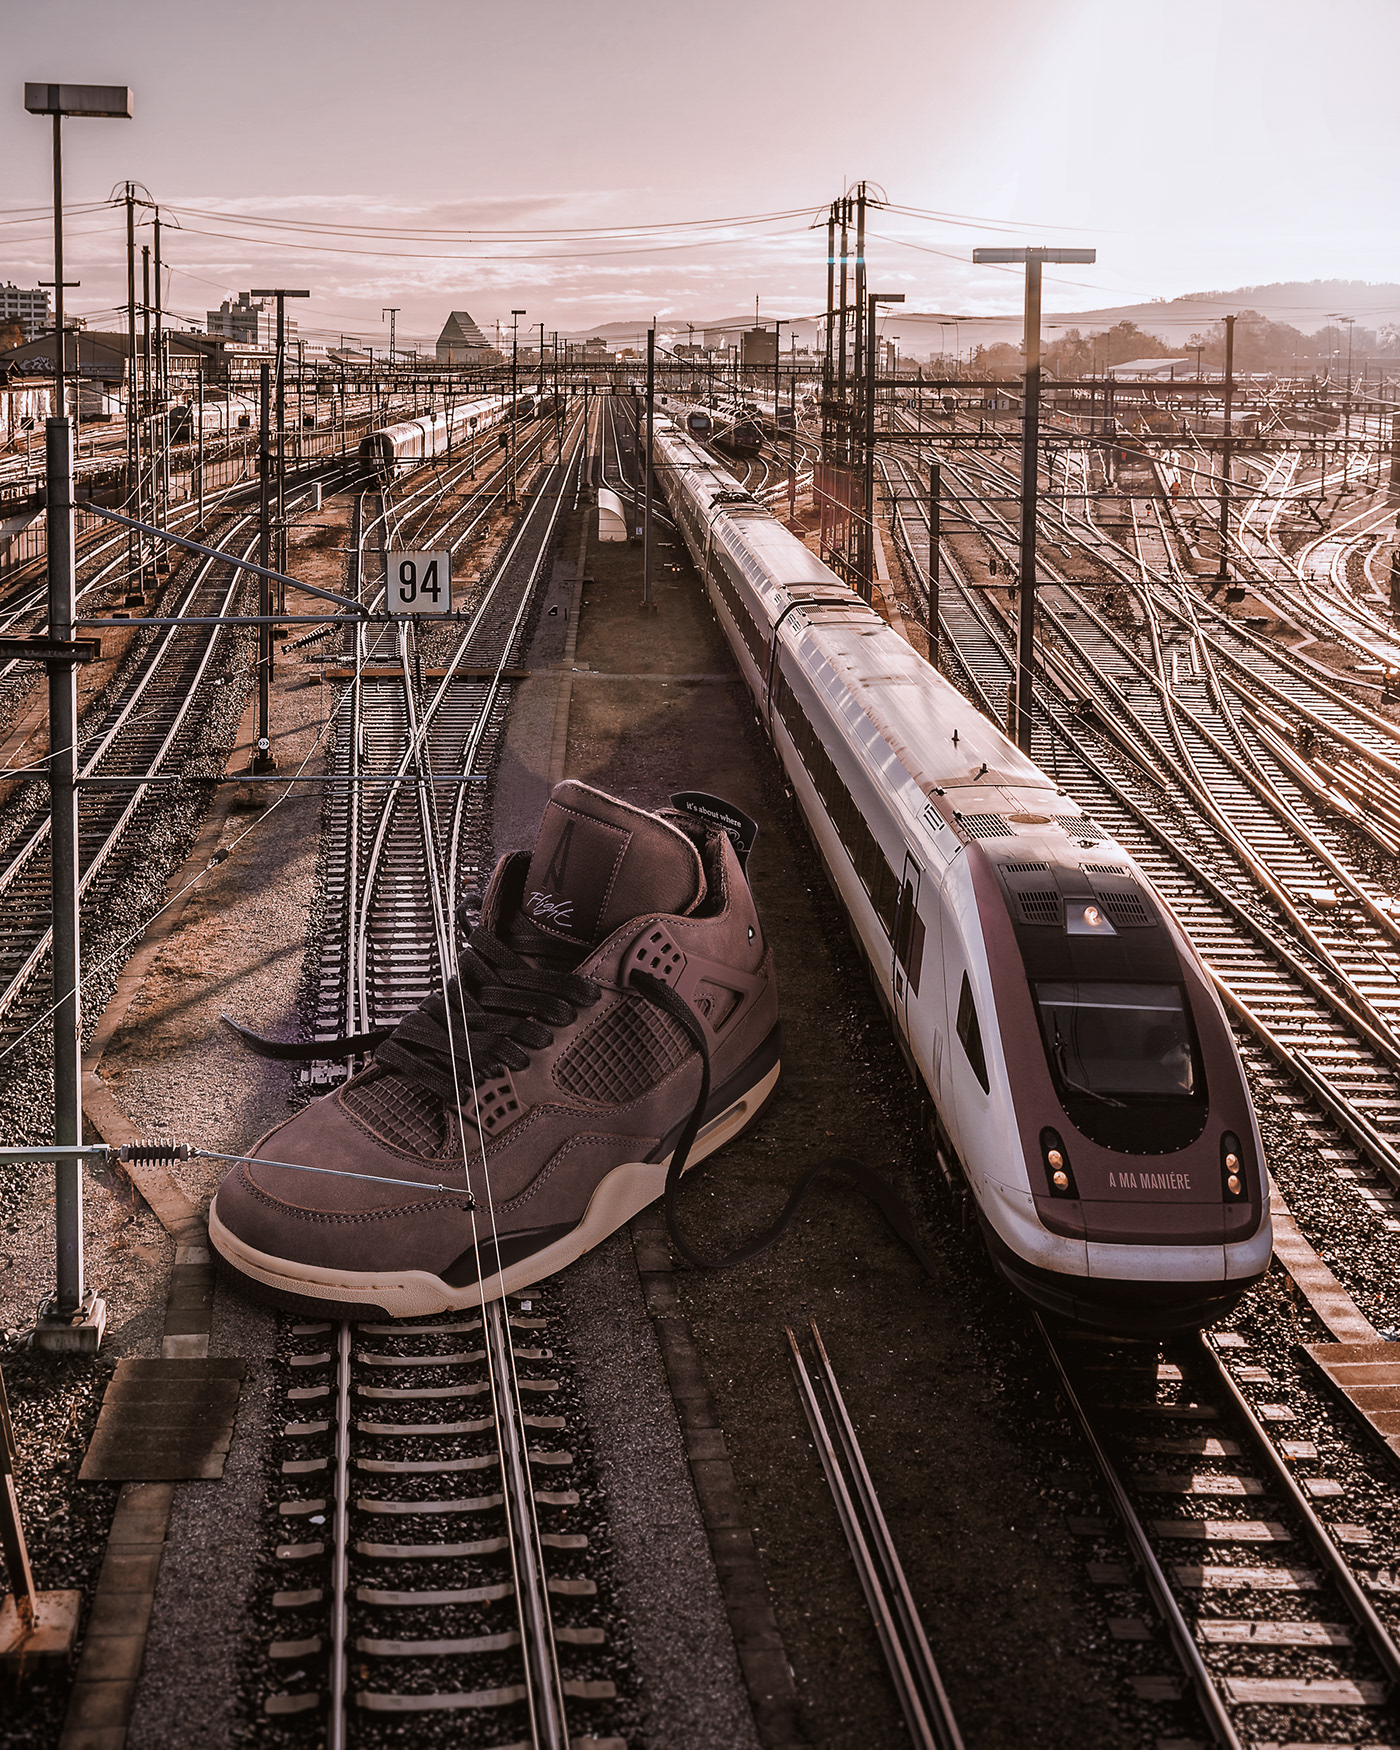 Giant sneaker photo composite on a train track . Retouching using Photoshop